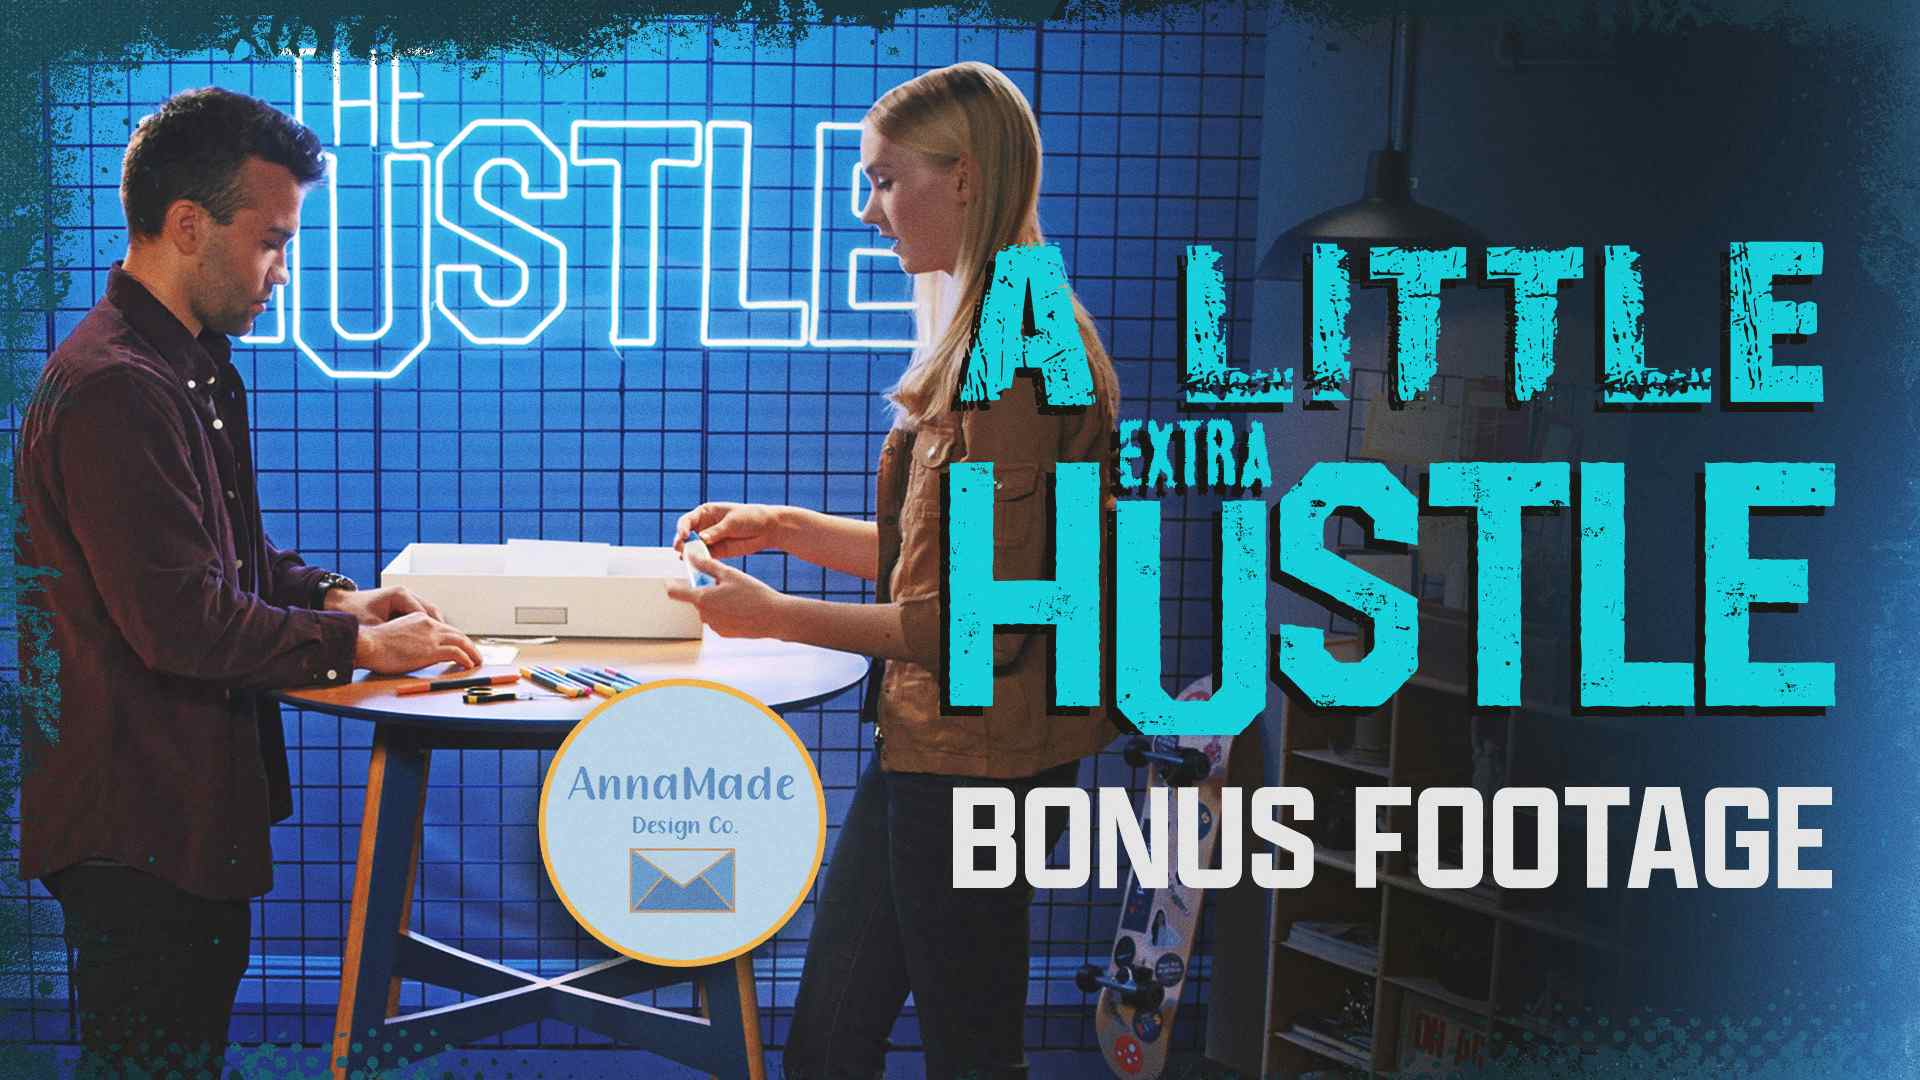 A Little Extra Hustle: Cards on the Table